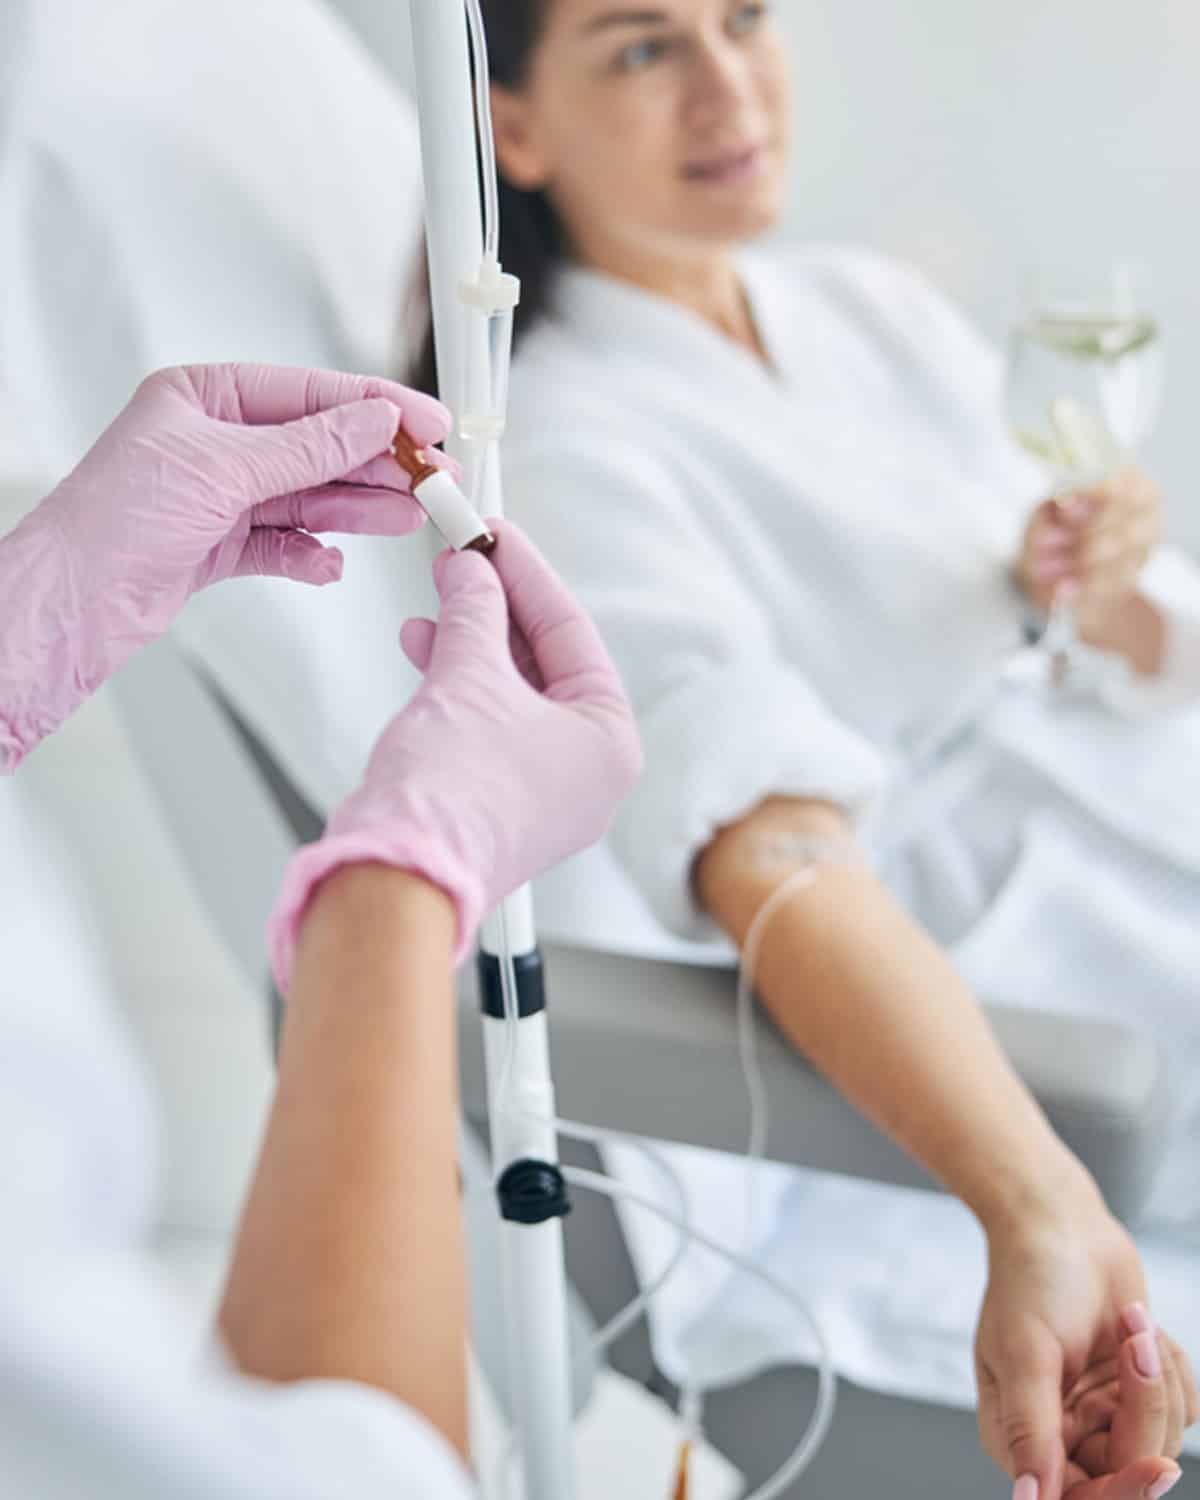 Ivtherapy Treatment